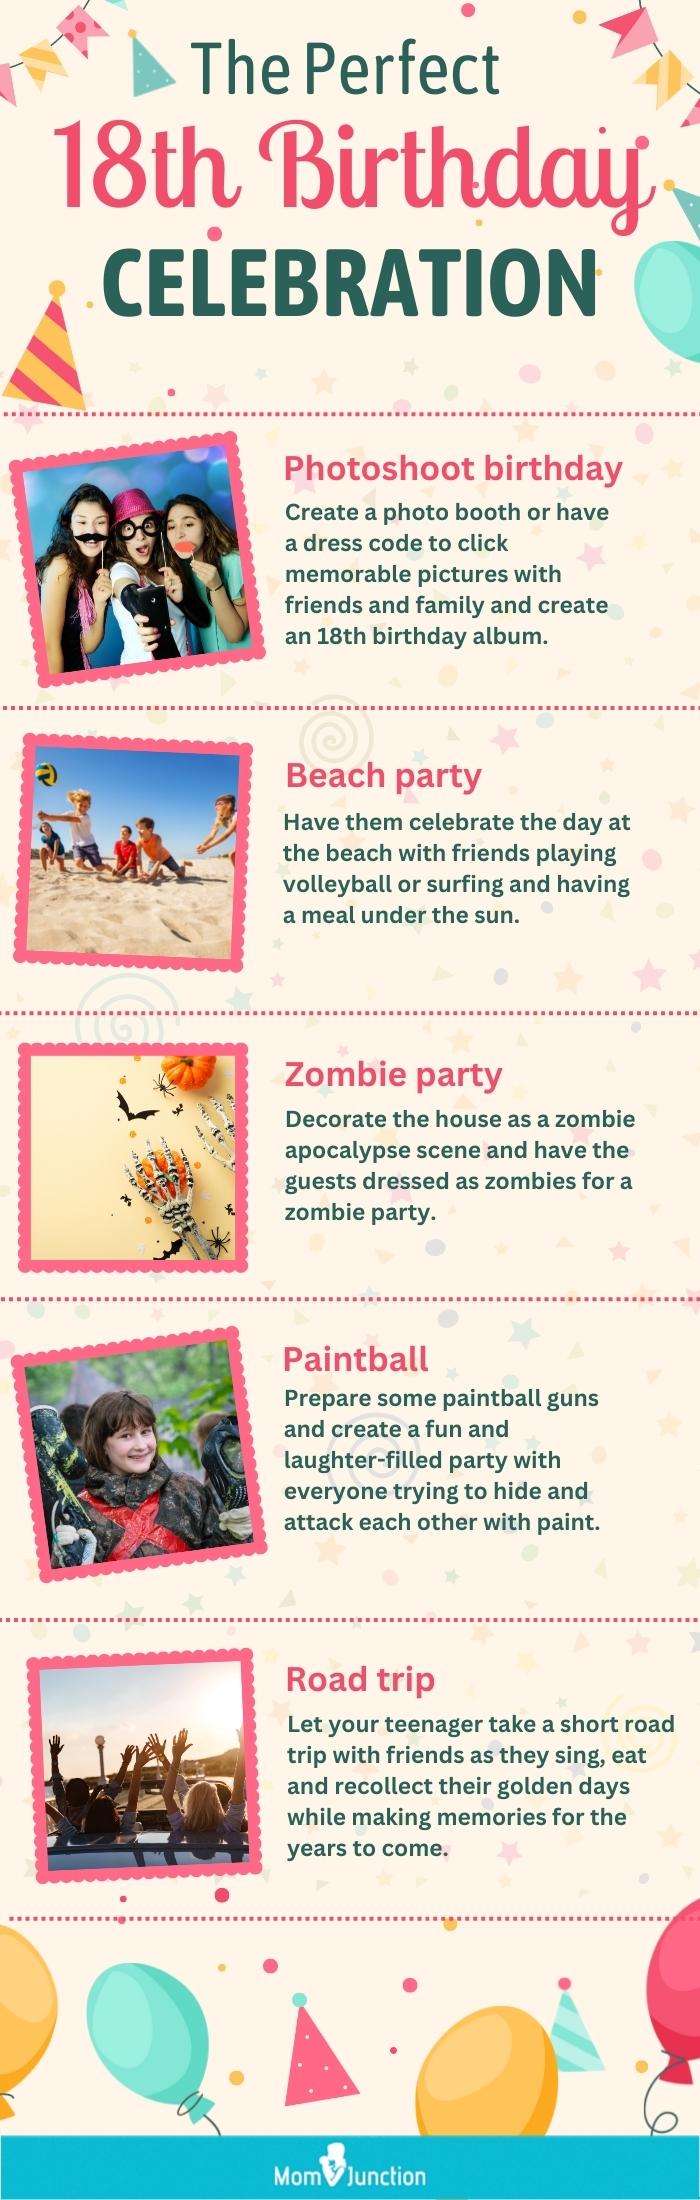 35 Unique Ideas For 18th Birthday Party, Themes & Decoration